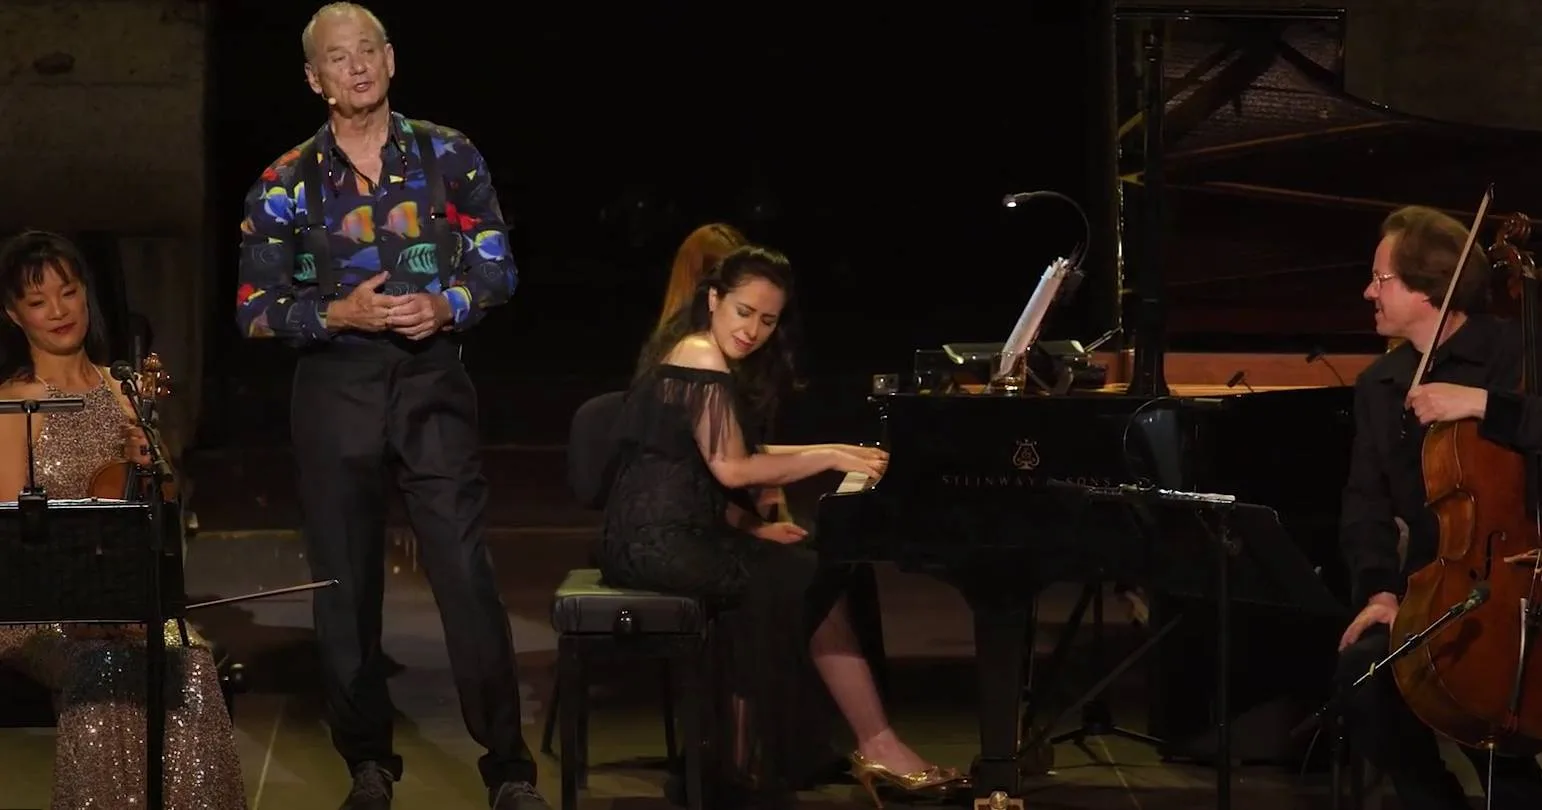 Does Bill Murray Play the Piano?